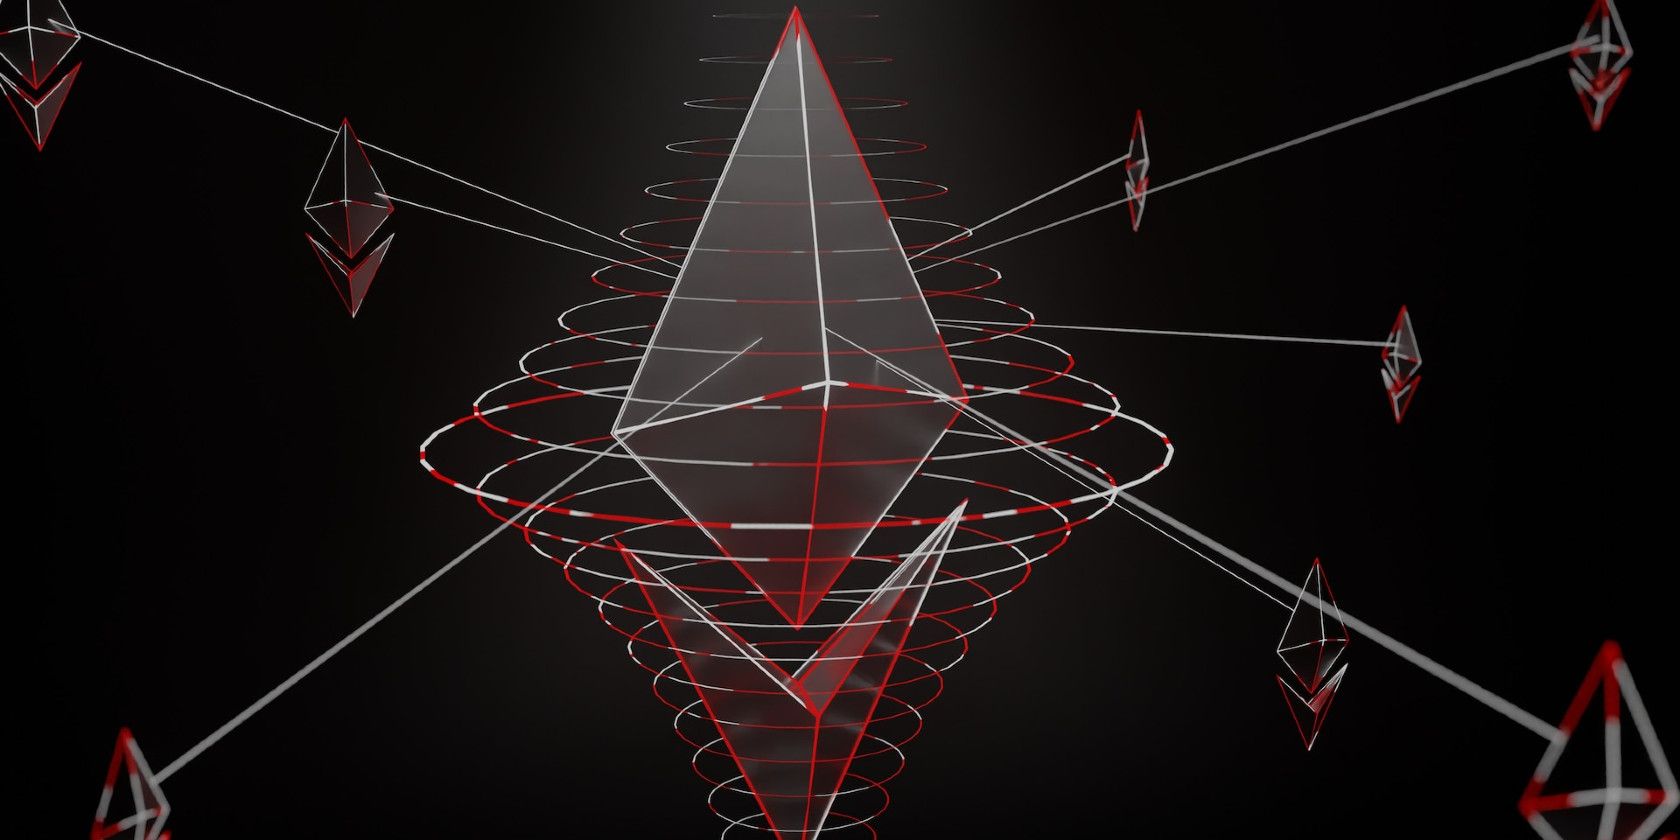 Ethereum blockchain on a black background with red and white lines